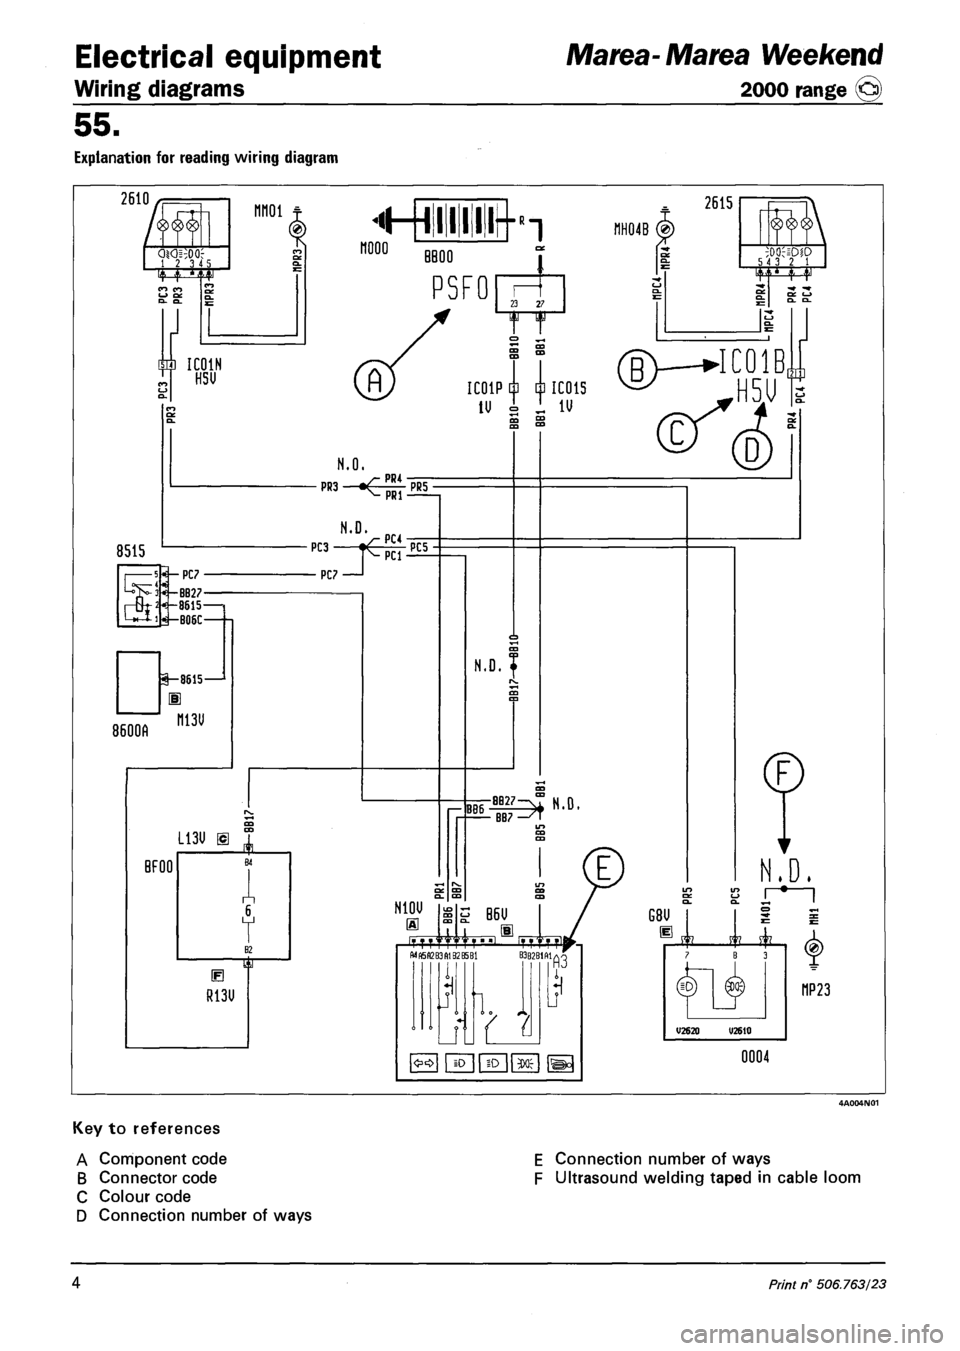 FIAT MAREA 2000 1.G Owners Manual Electrical equipment 
Wiring diagrams 
Marea- Marea Weekend 
2000 range © 
55. 
EXPLANATION FOR READING WIRING DIAGRAM 
2610/f=T 
1 2 3 " 
nnoi t 
m IC01H ^ HSU 
8515 
^— PC7 
-BB27 -8615 1 W-B06C-